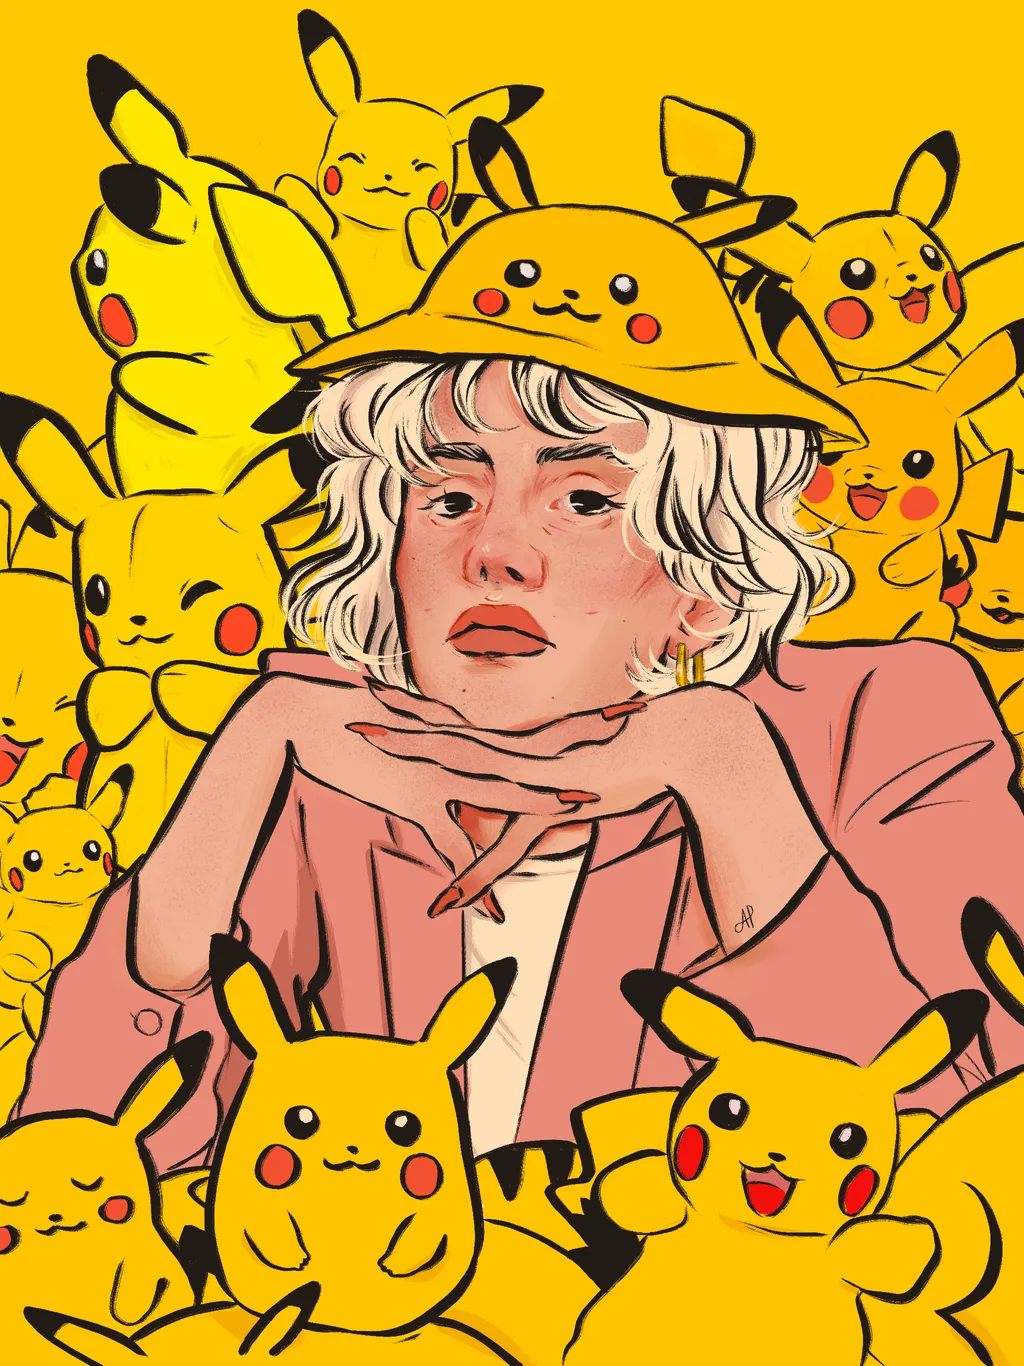 a digital illustration of a young, blonde girl with indifferent face surrounded by multitude of Pikachu pokemon plushies